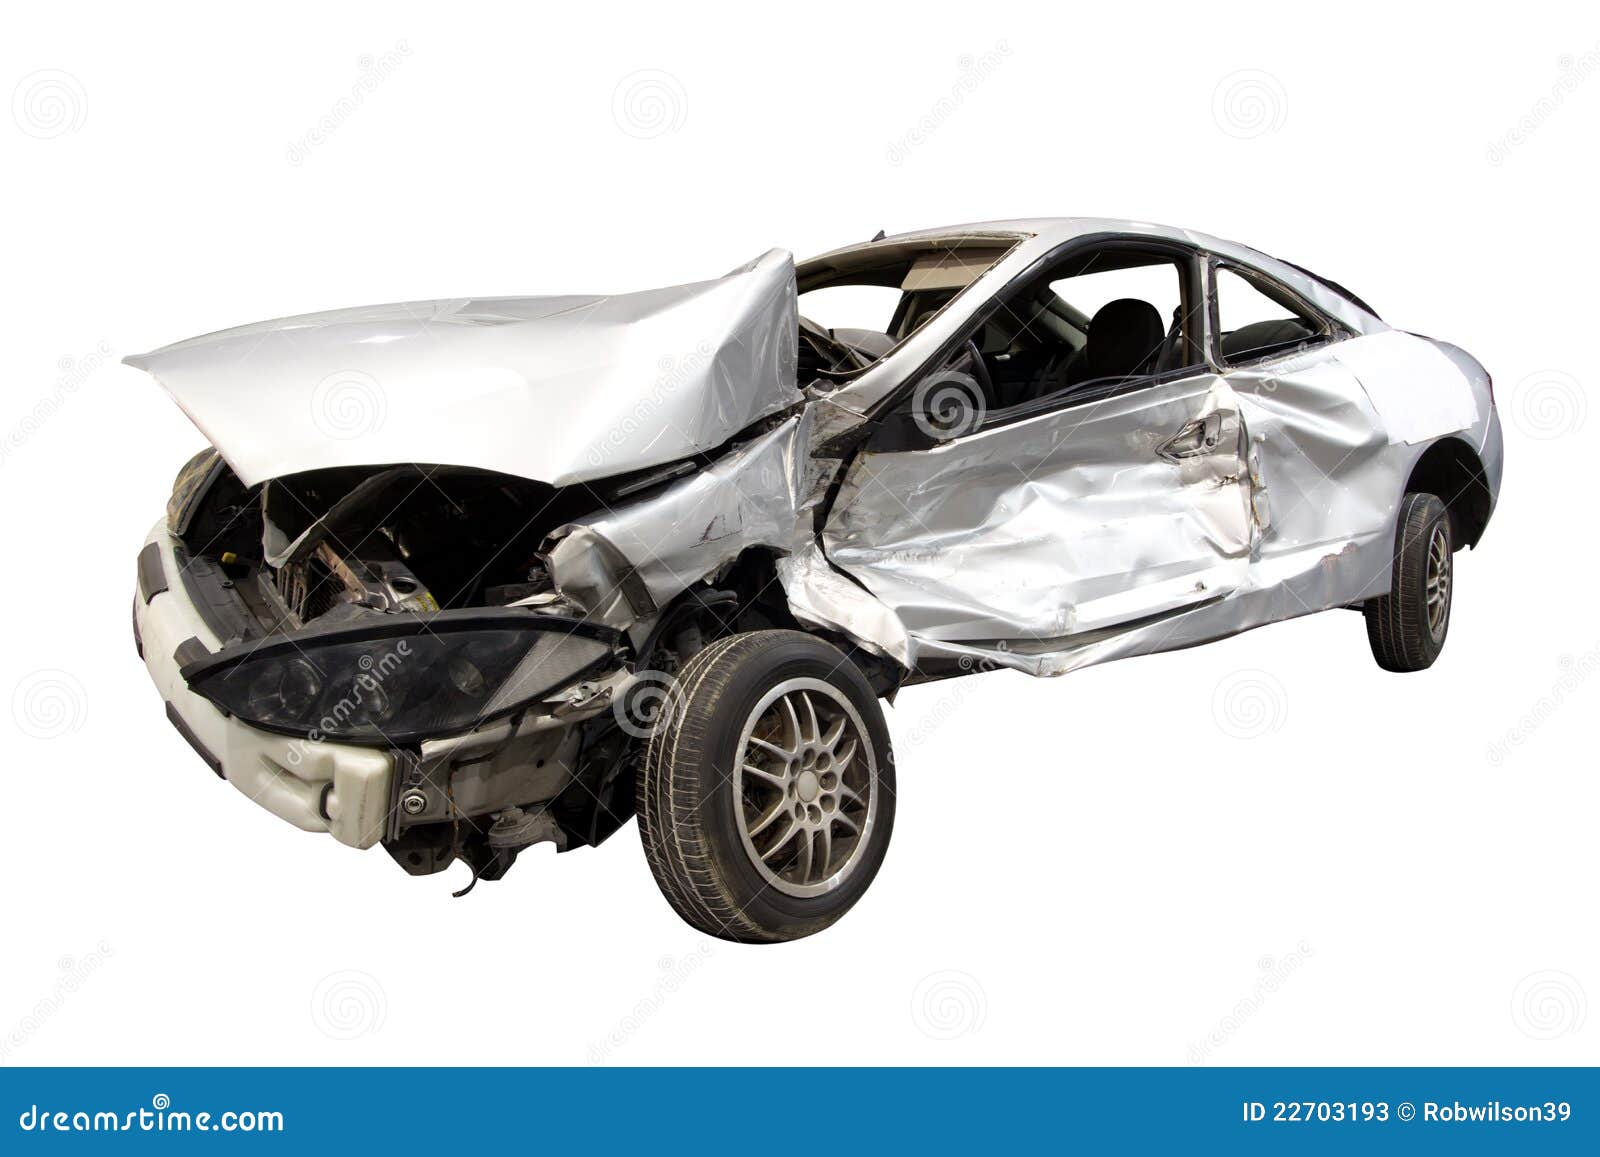 free clipart wrecked car - photo #41